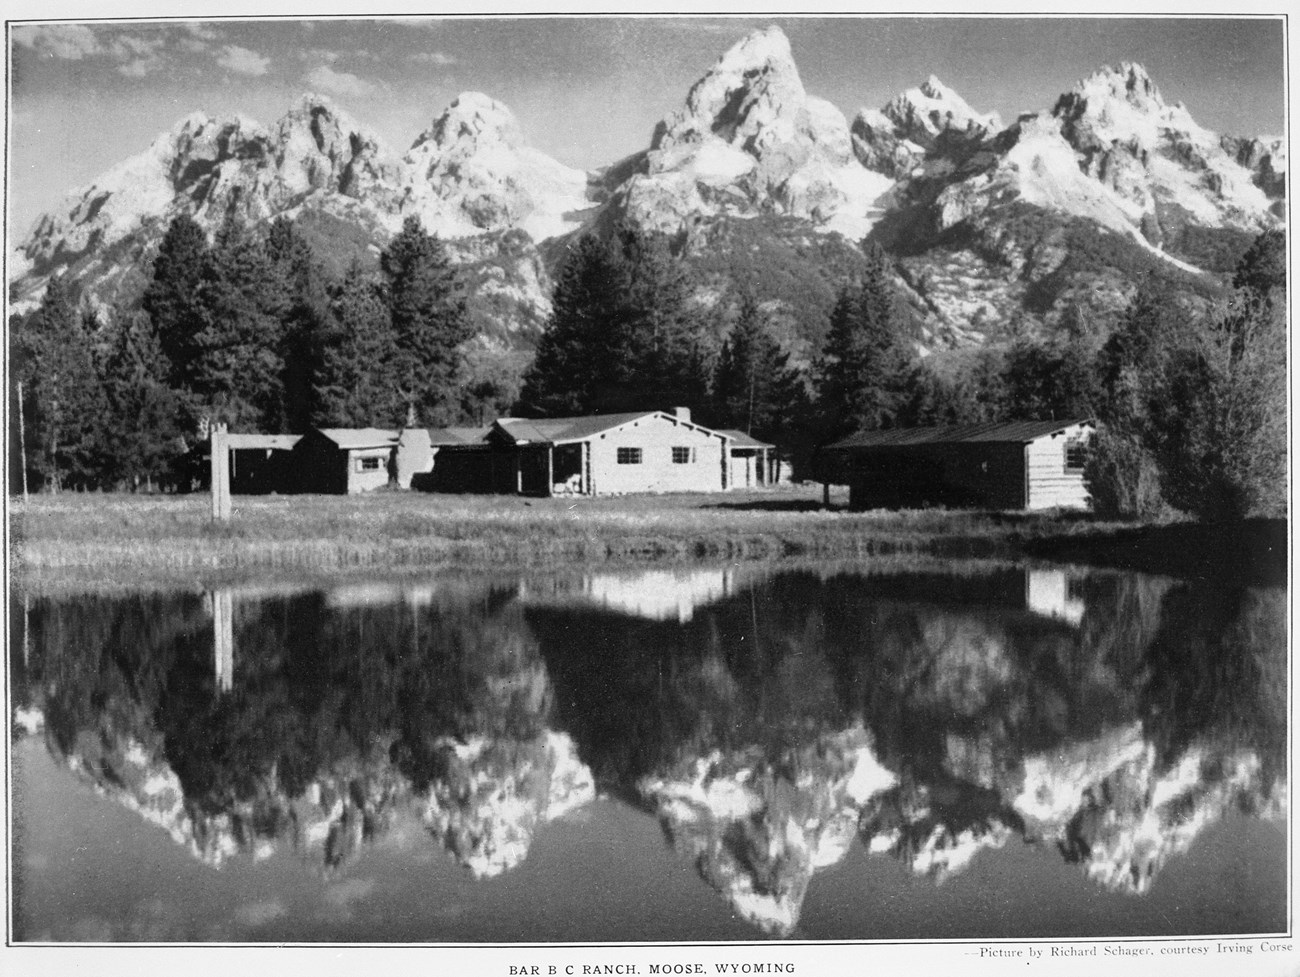 Several log buildings are viewed across a reflecting pool, surrounded by pine trees, with snow-capped peaks beyond.